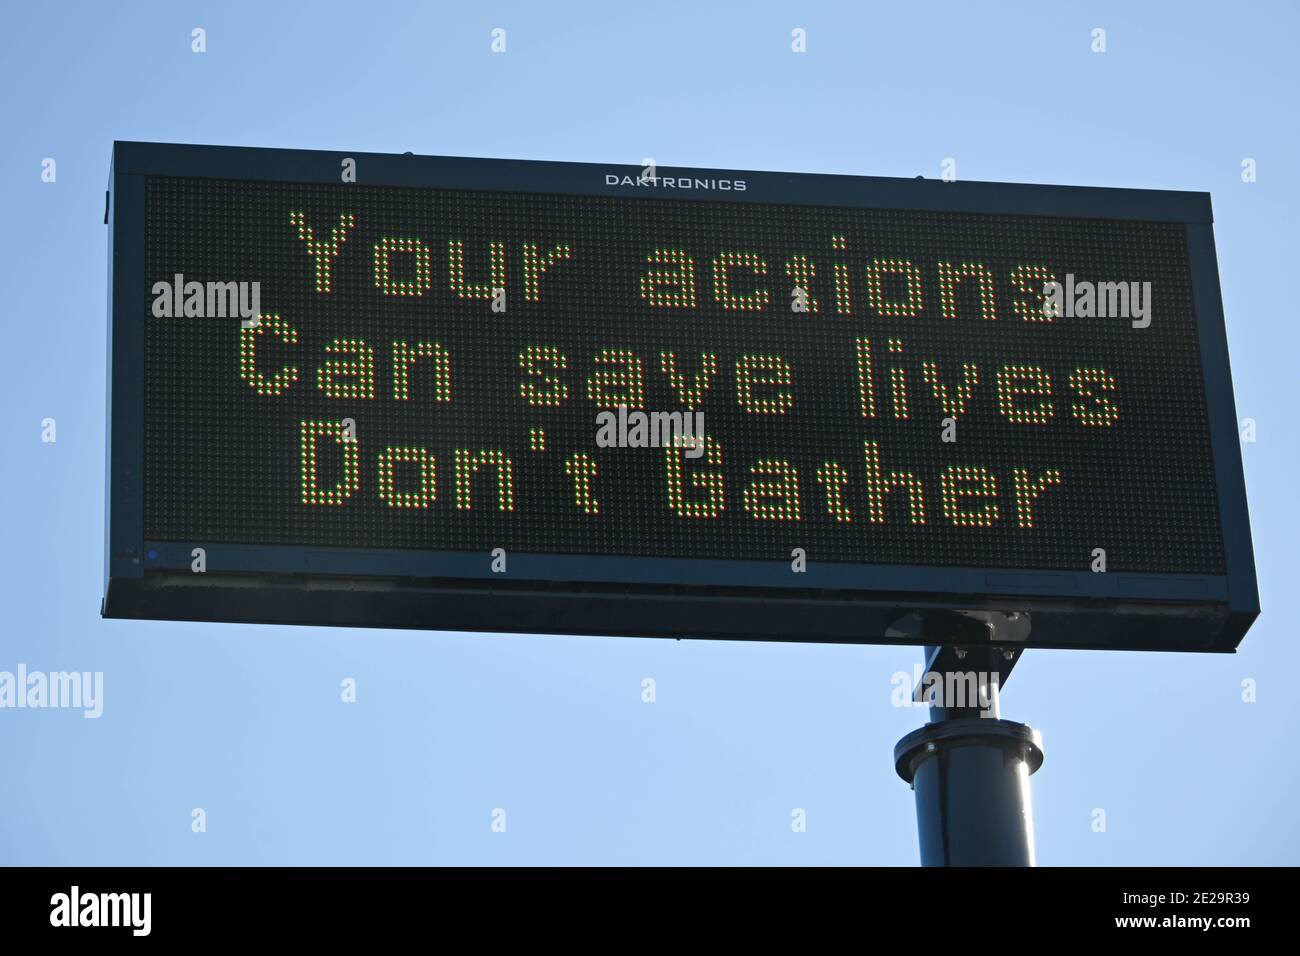 A message board is illuminated reading “Your actions can save lives don’t gather”, Saturday, Jan. 2, 2021, in Pasadena, Calif. (Dylan Stewart/Image of Stock Photo